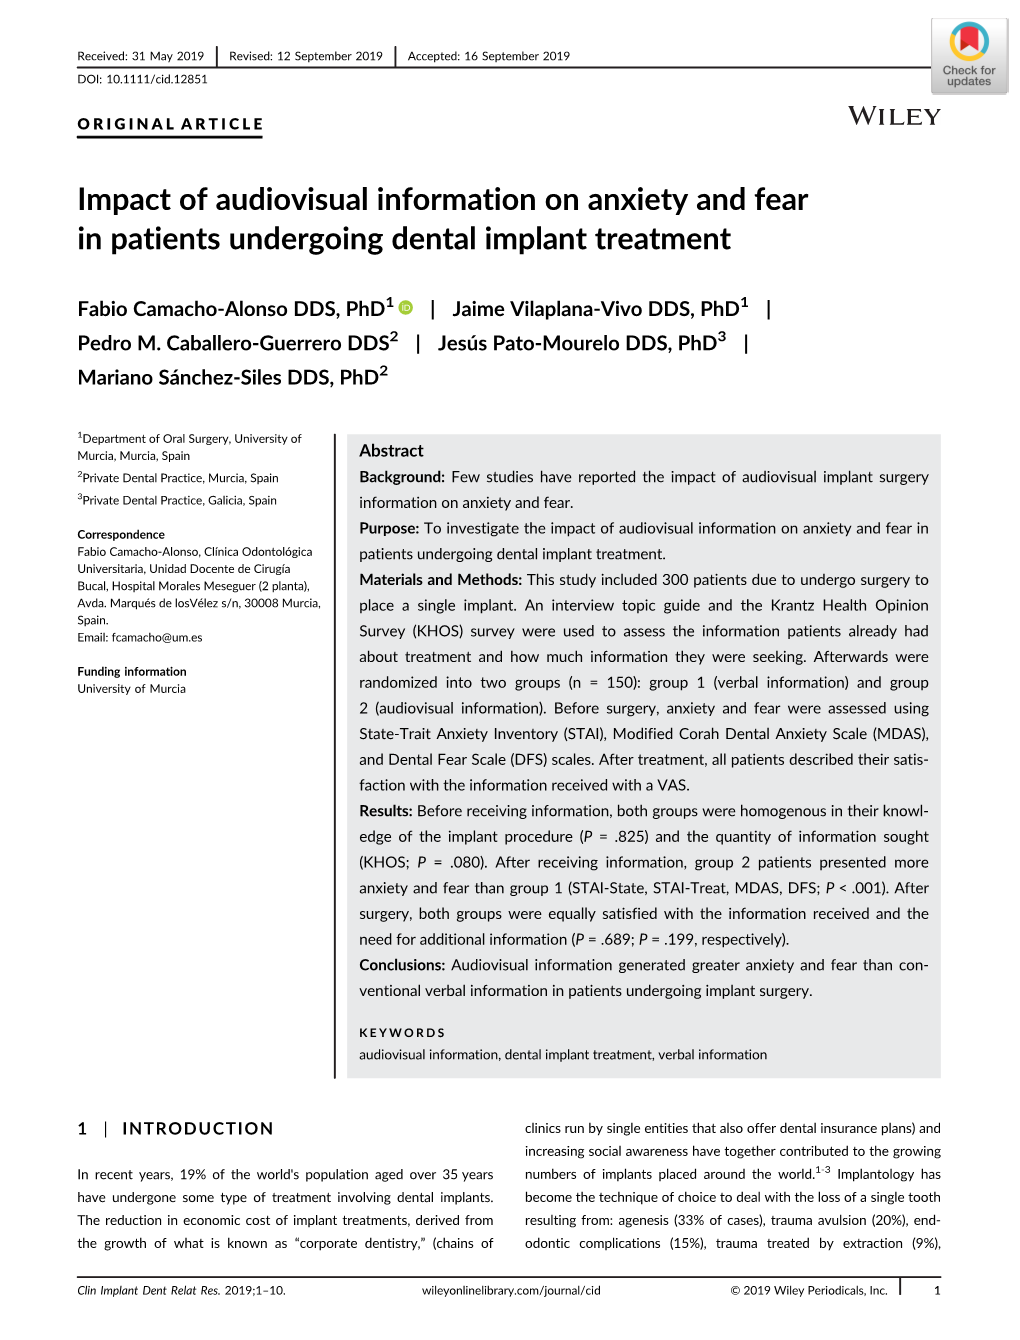 Impact of Audiovisual Information on Anxiety and Fear in Patients Undergoing Dental Implant Treatment